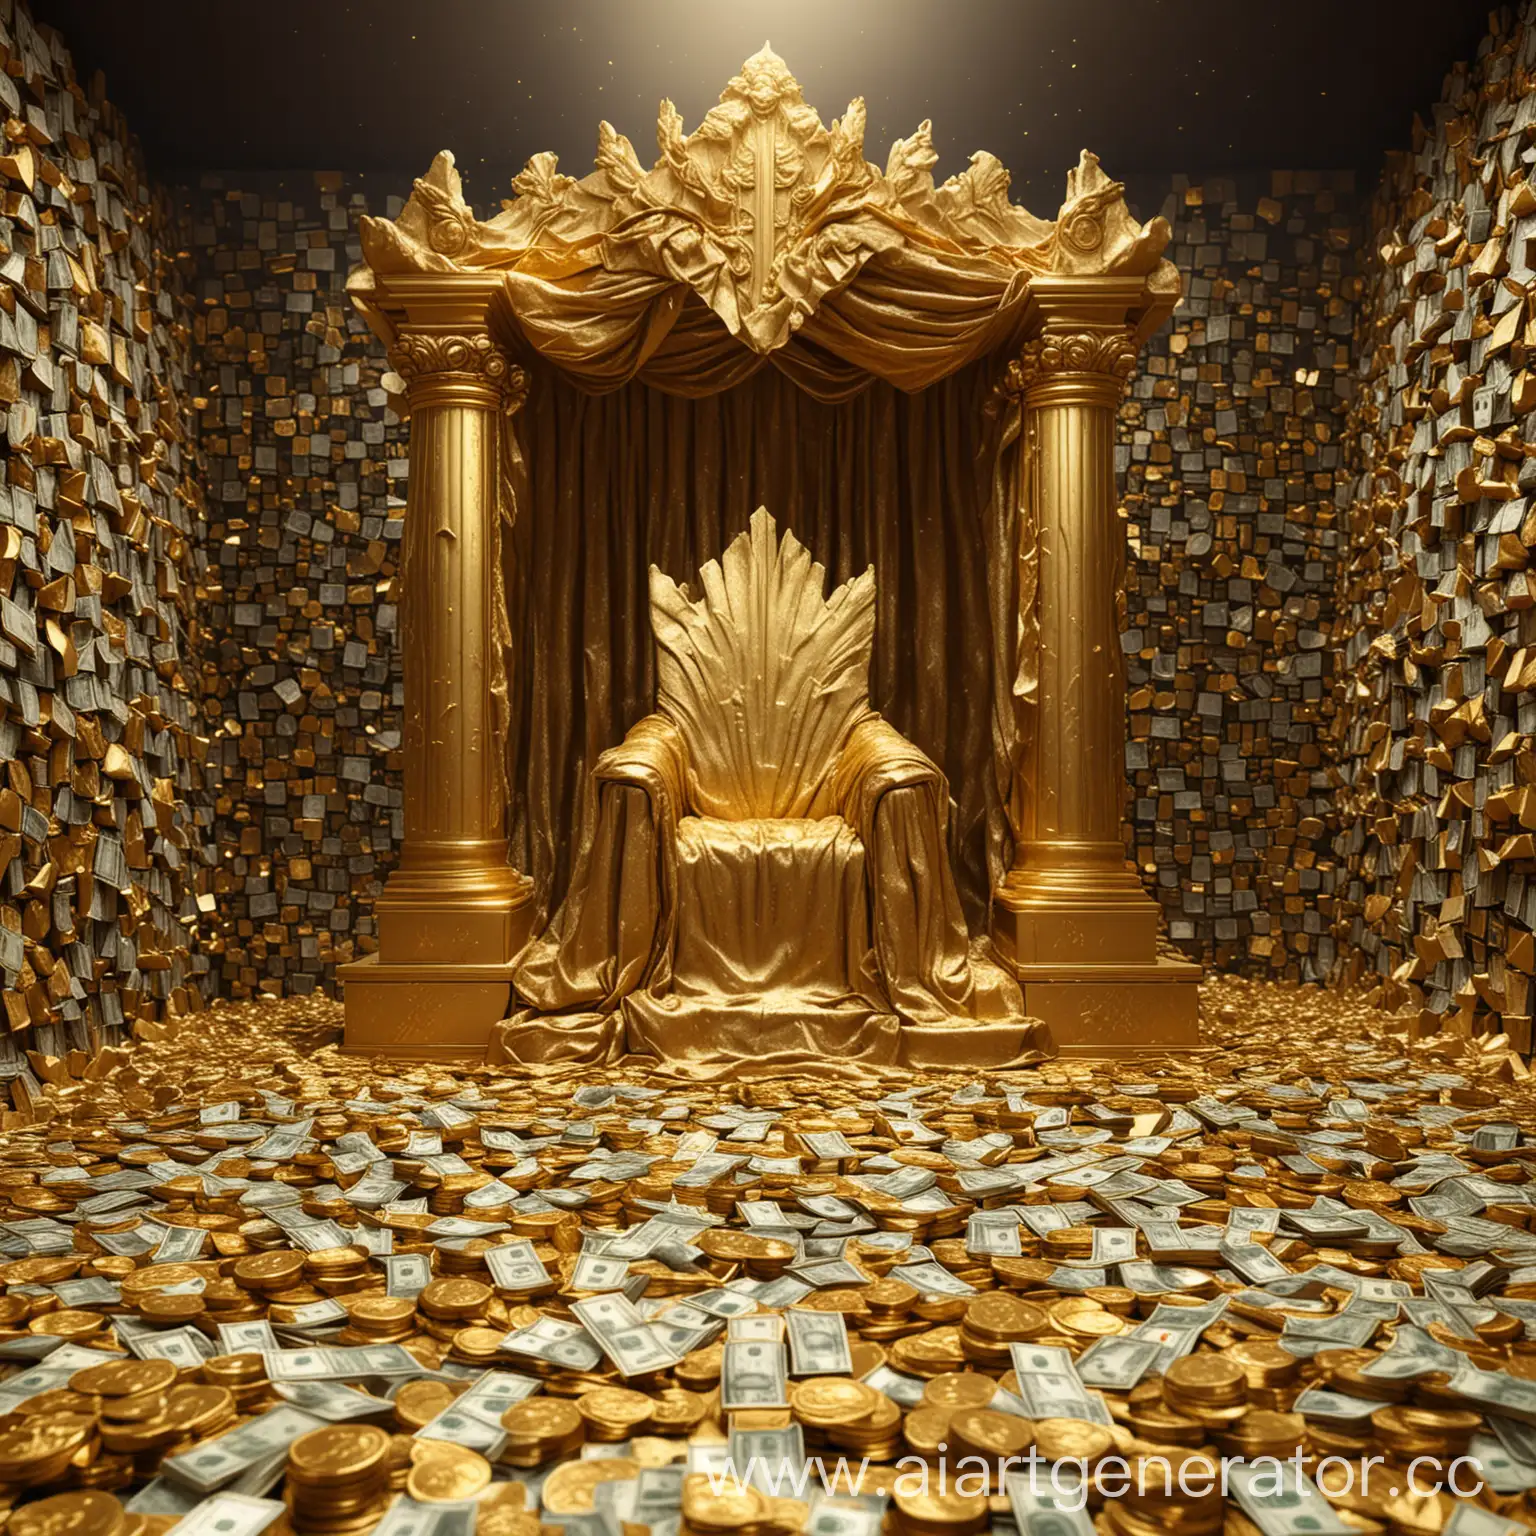 Luxurious-Golden-Throne-Surrounded-by-Mountains-of-Money-and-Gold